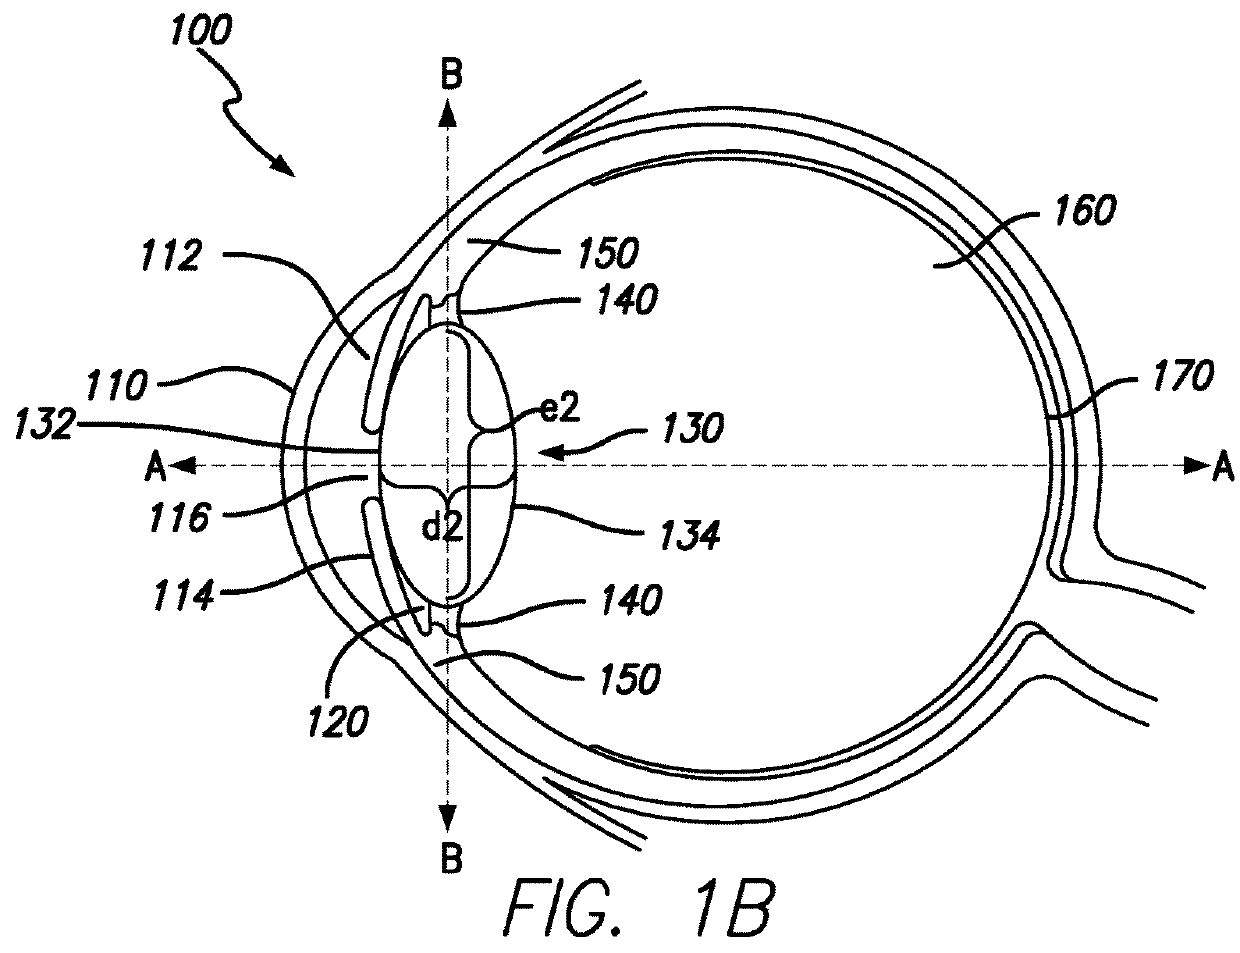 Method and system for adjusting the refractive power of an implanted intraocular lens